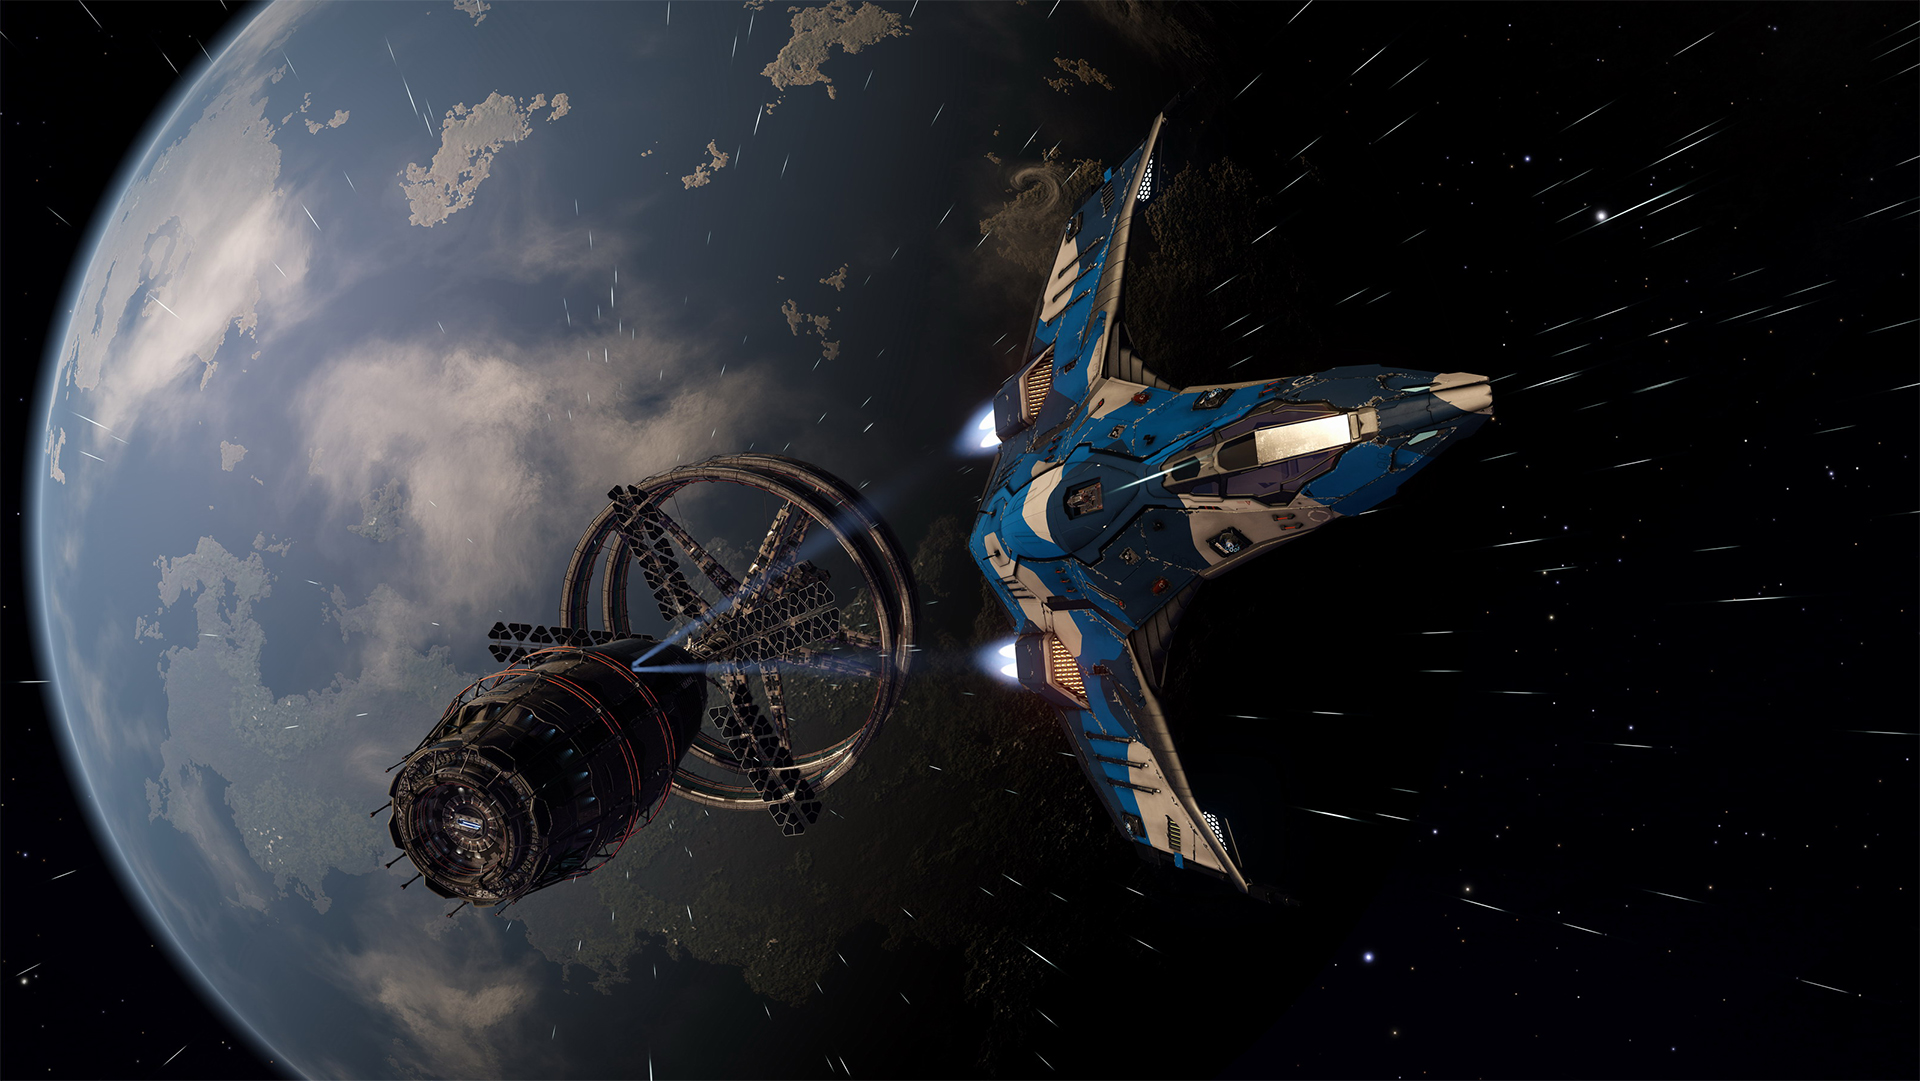 Elite Dangerous hits 1.0, is now available to the public Ars Technica